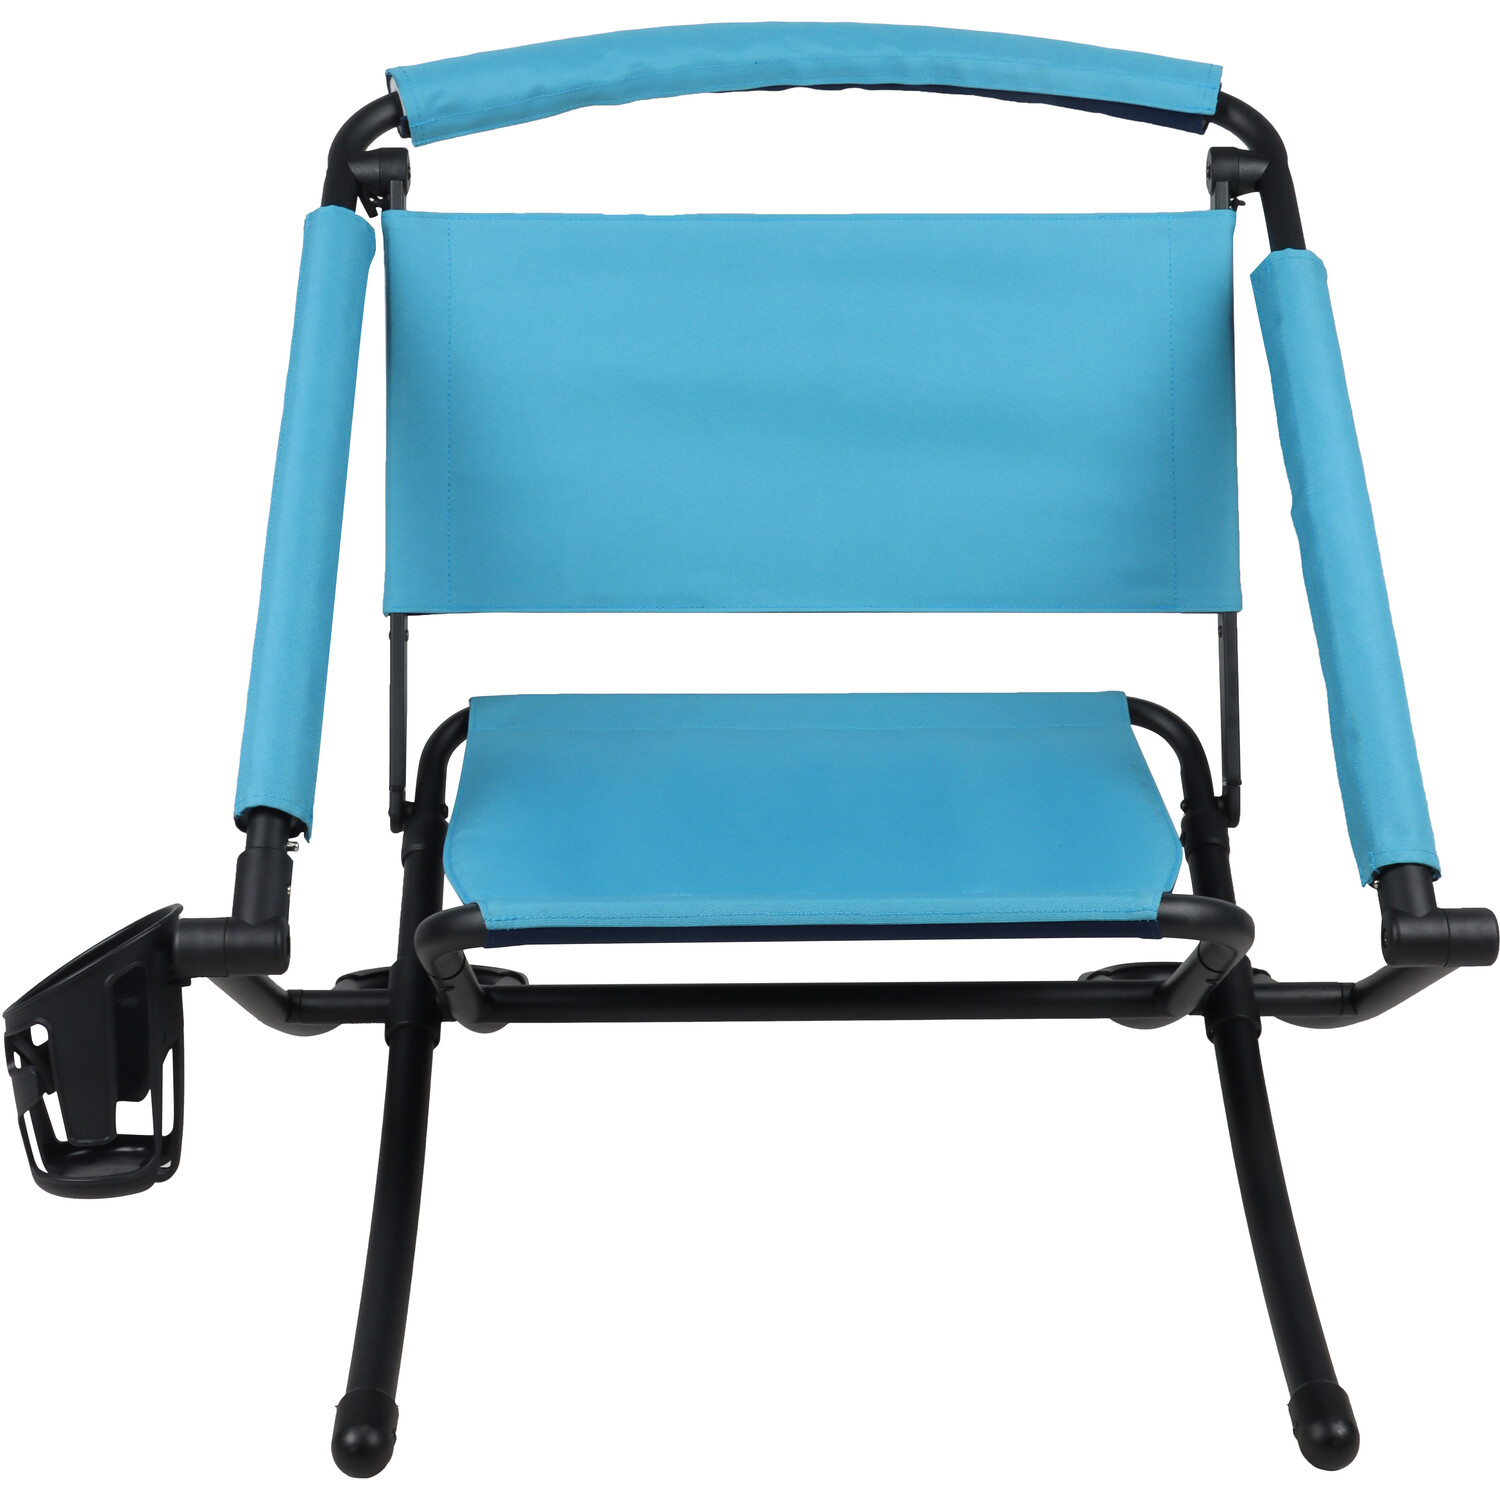 Multifunction Camping Chair Image 2